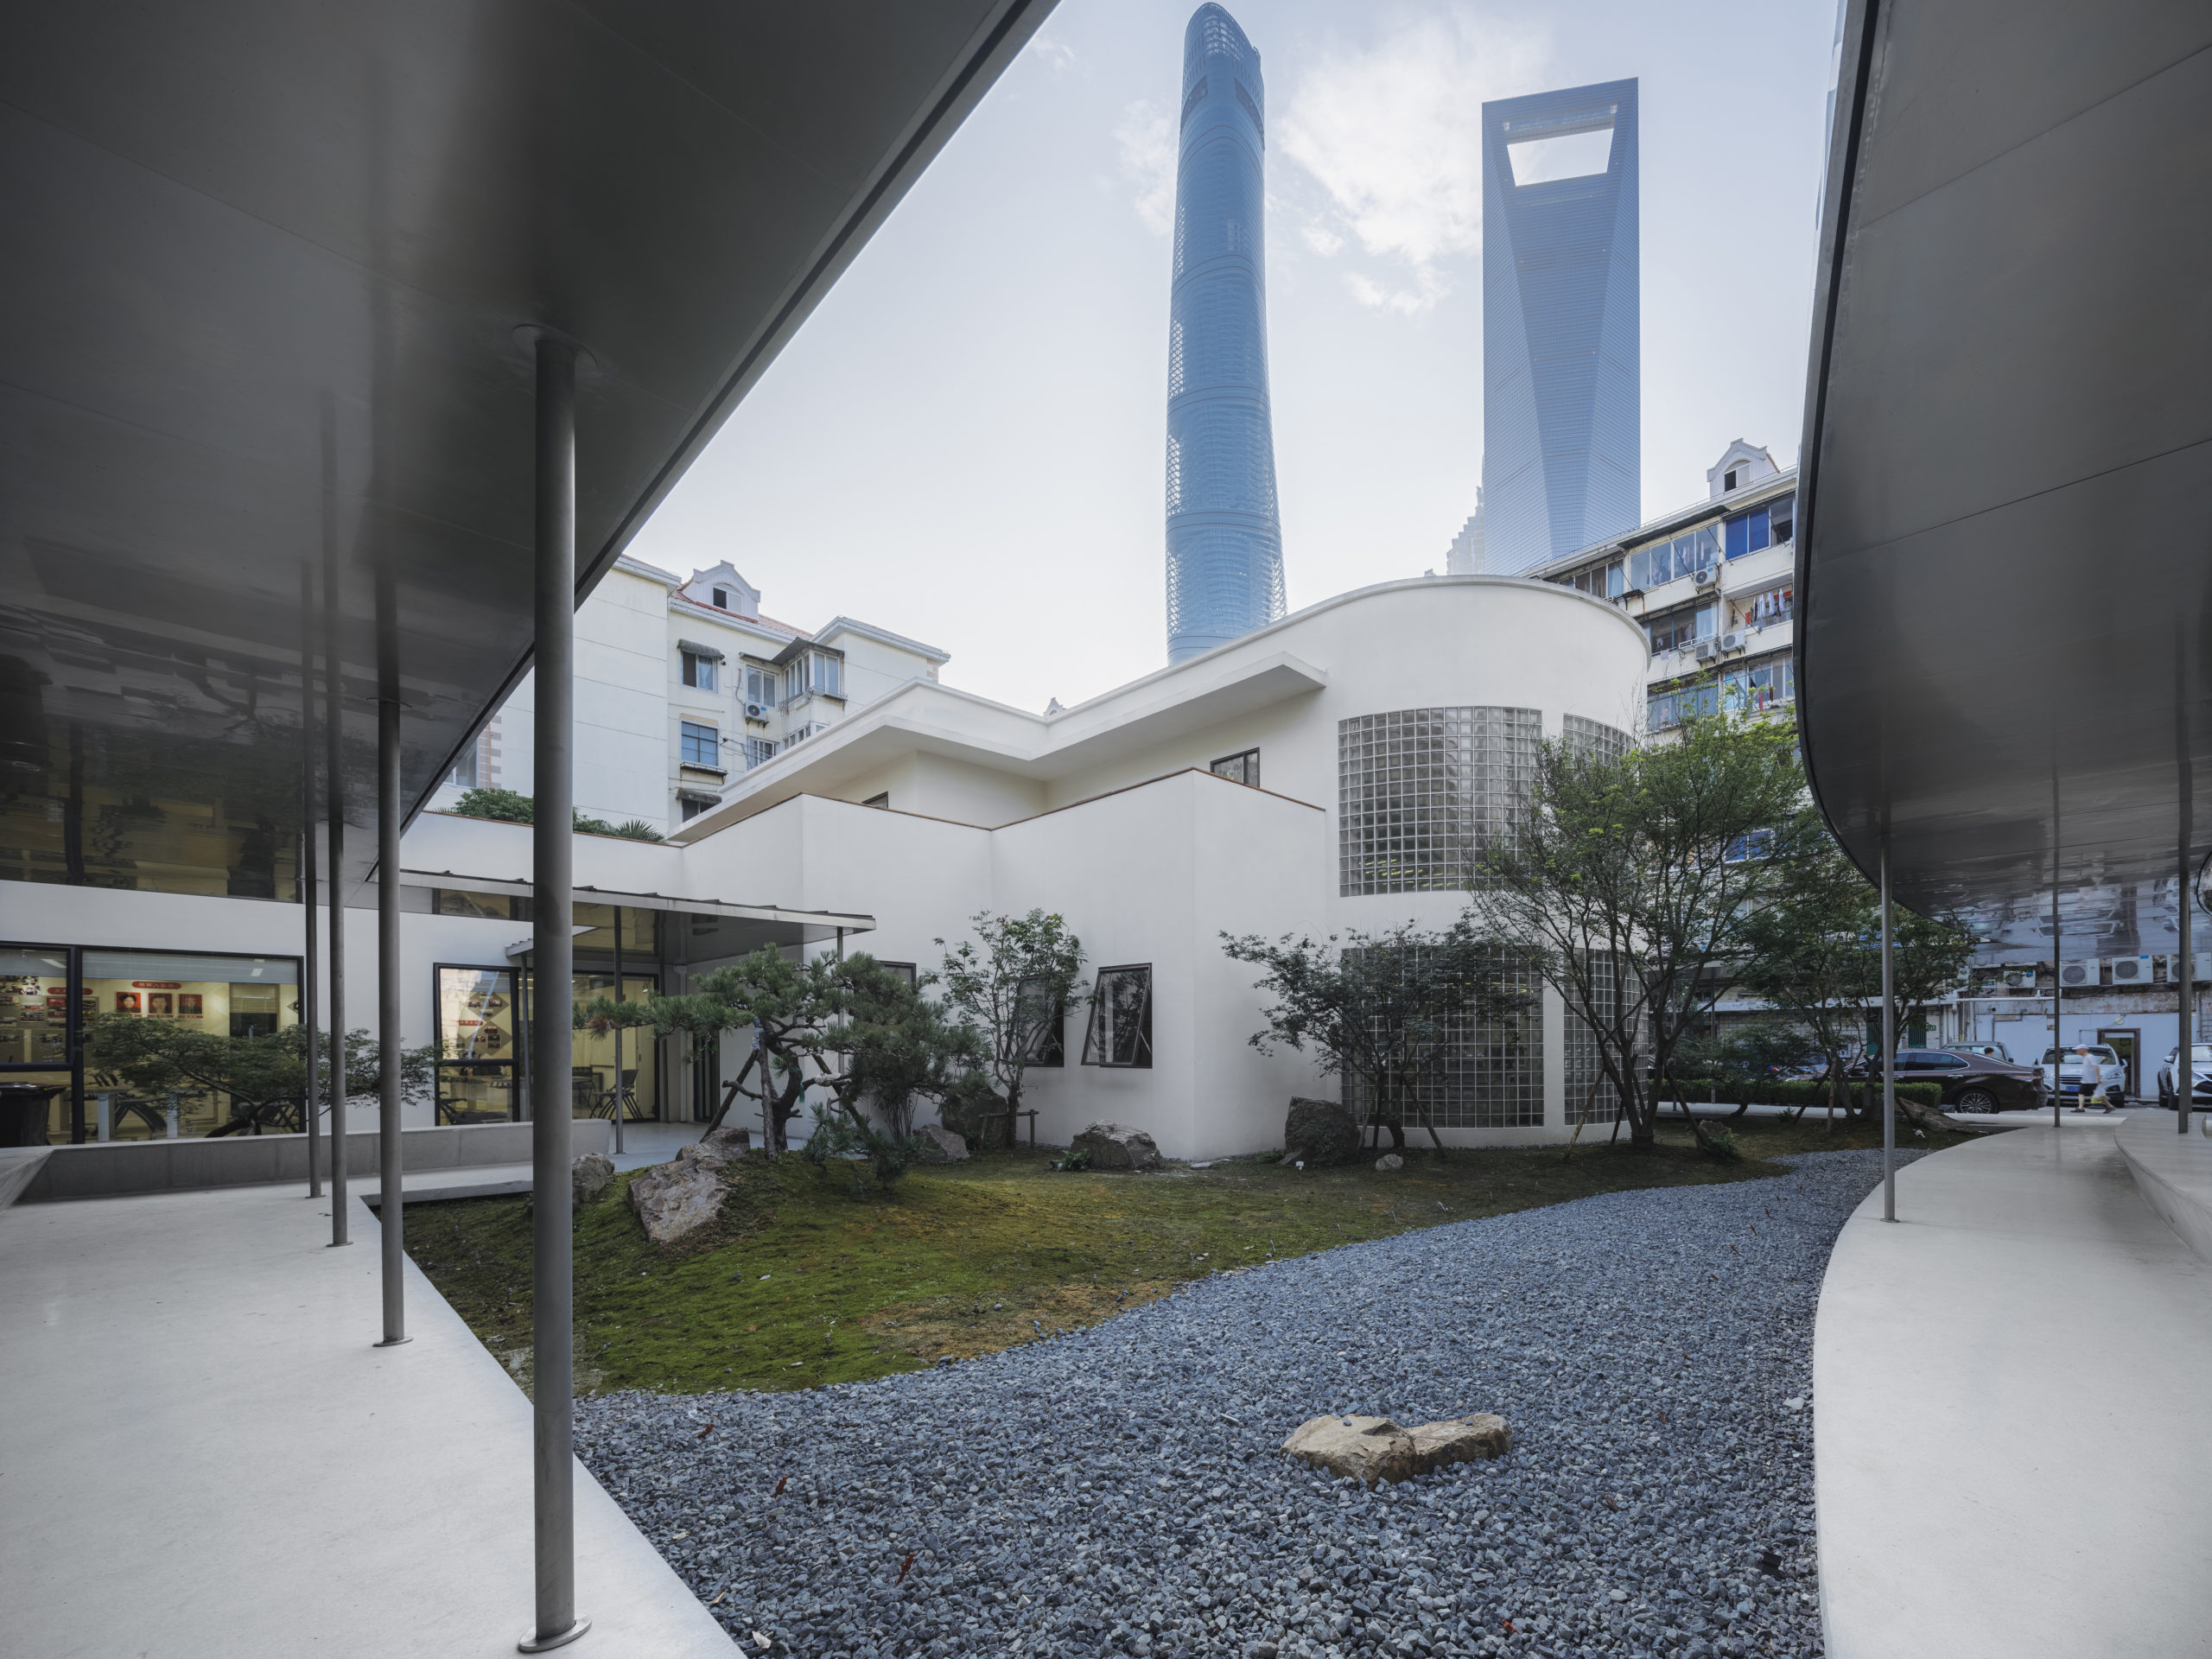 Community center in Shanghai exterior view with skyscrapers in background